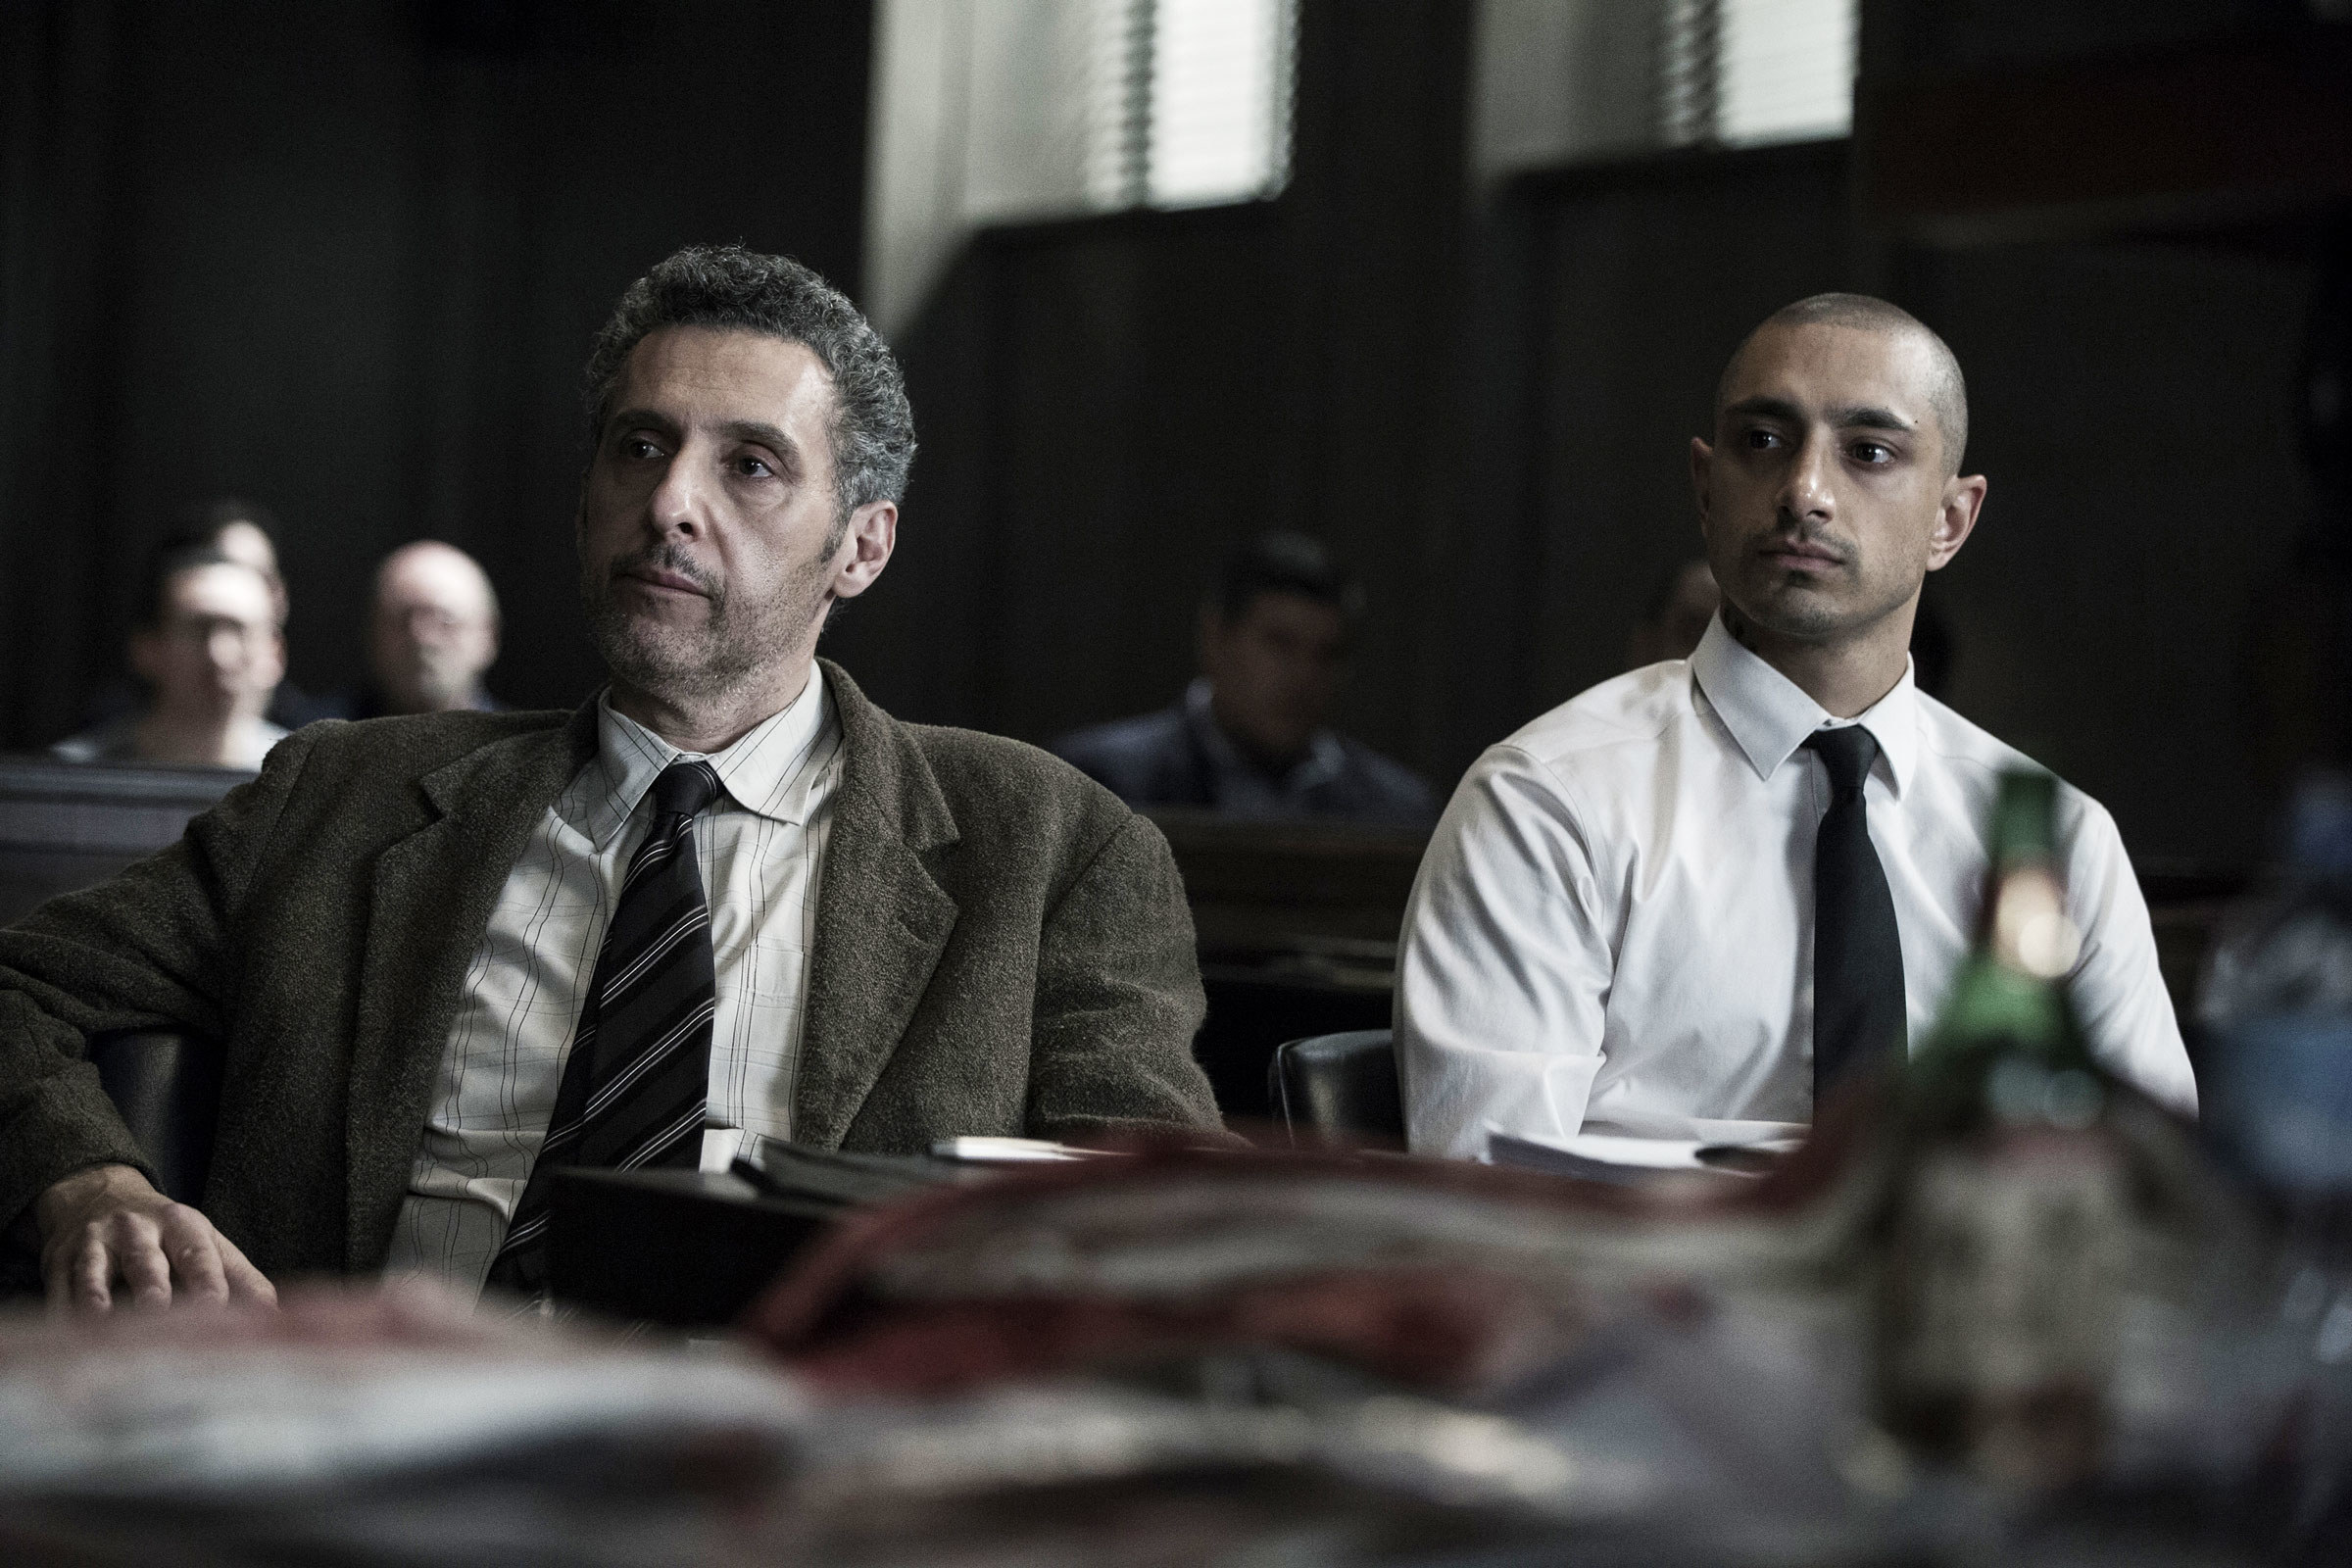 John Turturro as attorney John Stone sat next to Riz Ahmed as Nasir Khan in a court proceeding in &quot;The Night Of&quot;